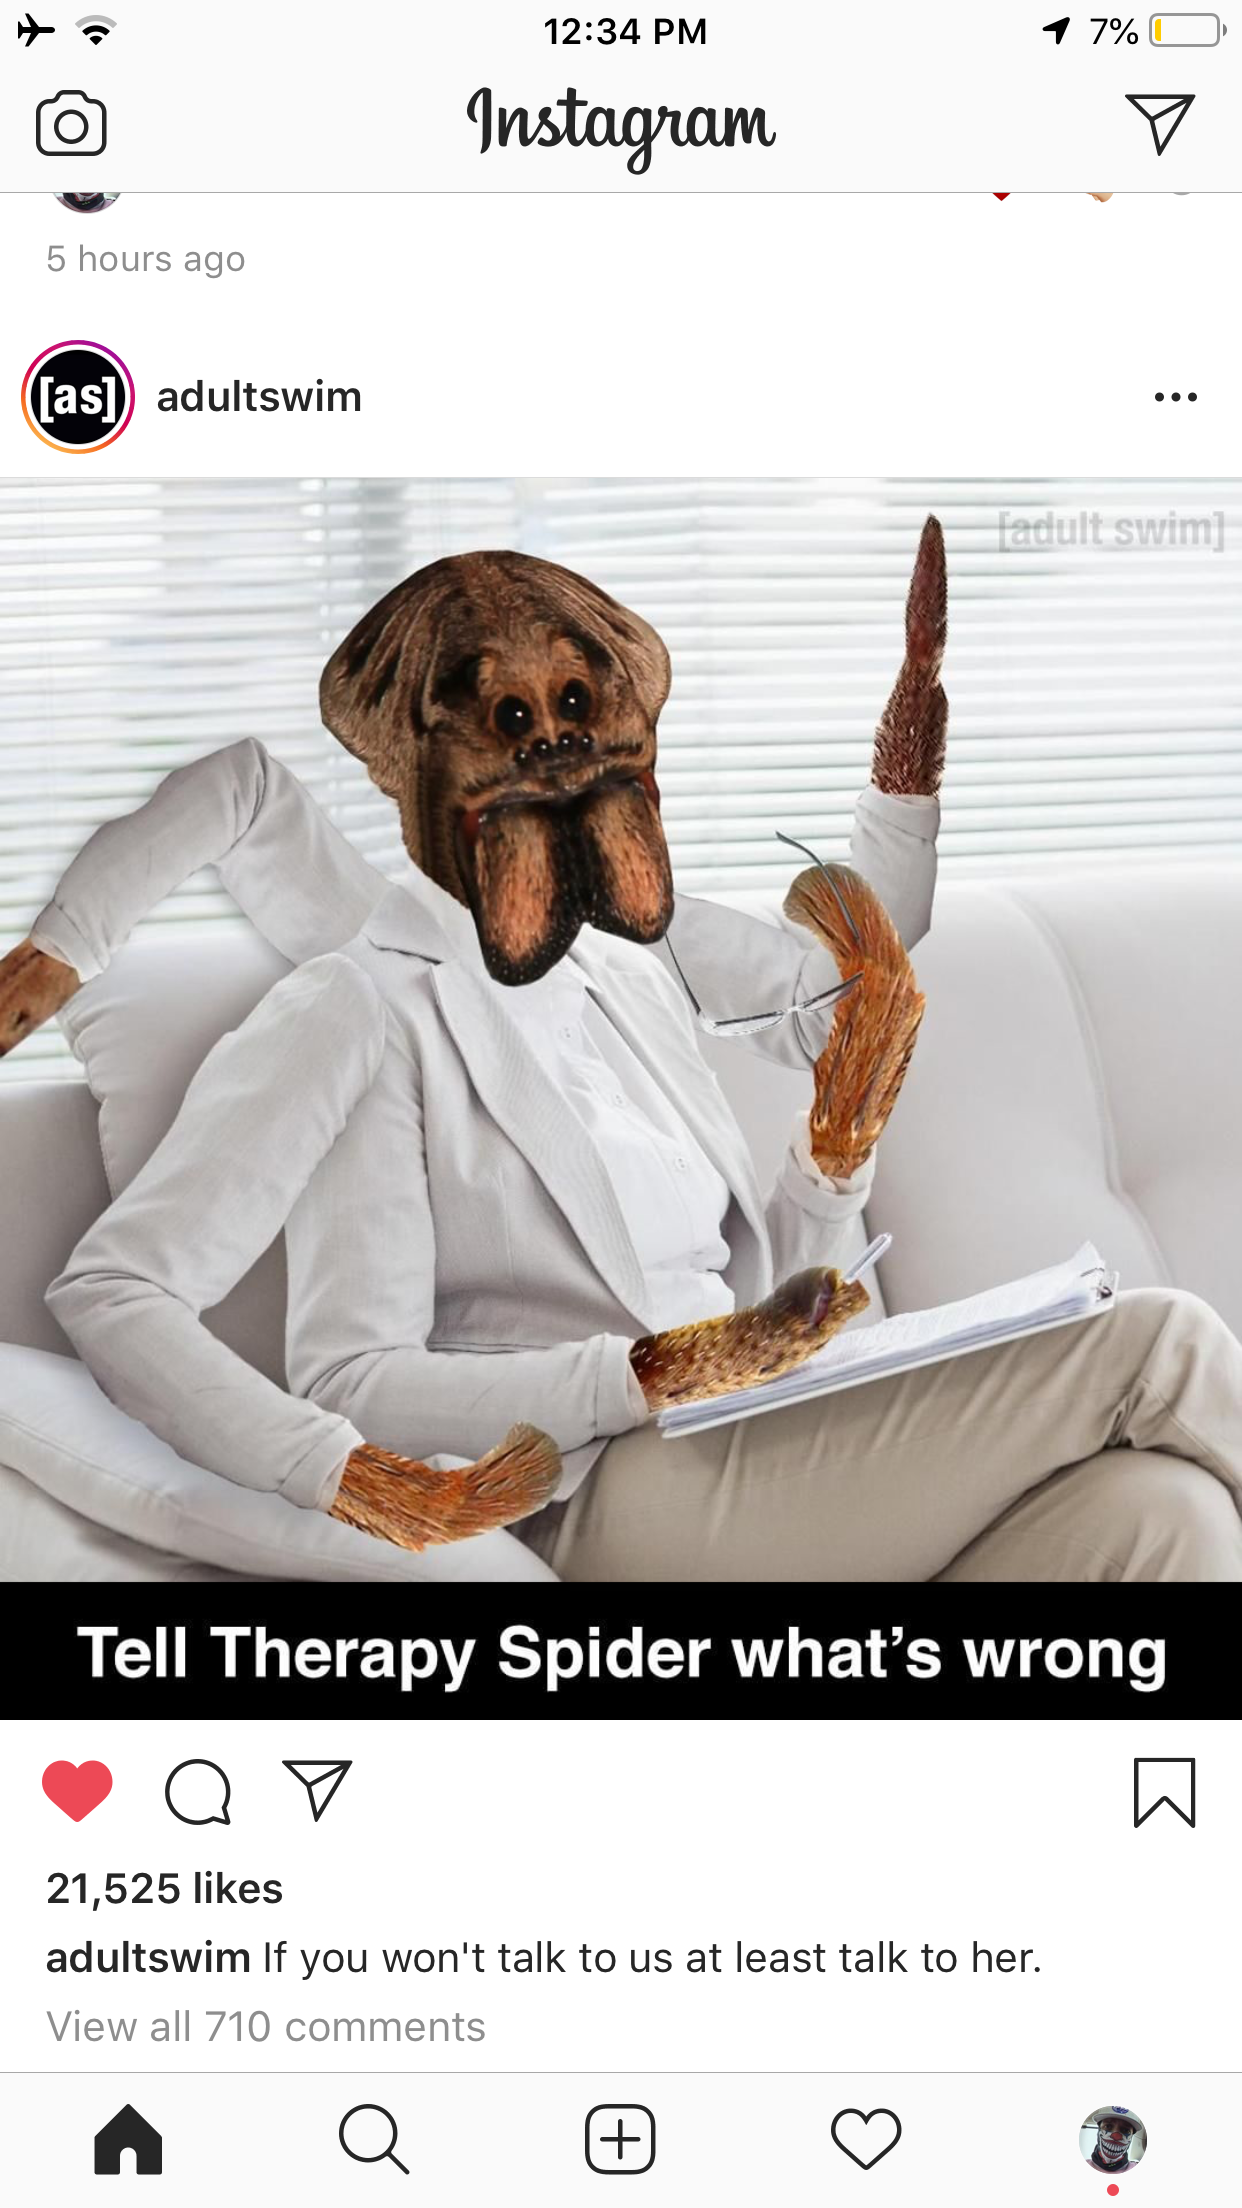 instagram - 7% Instagram 5 hours ago as adultswim ... Tell Therapy Spider what's wrong 21,525 adultswim If you won't talk to us at least talk to her View all 710